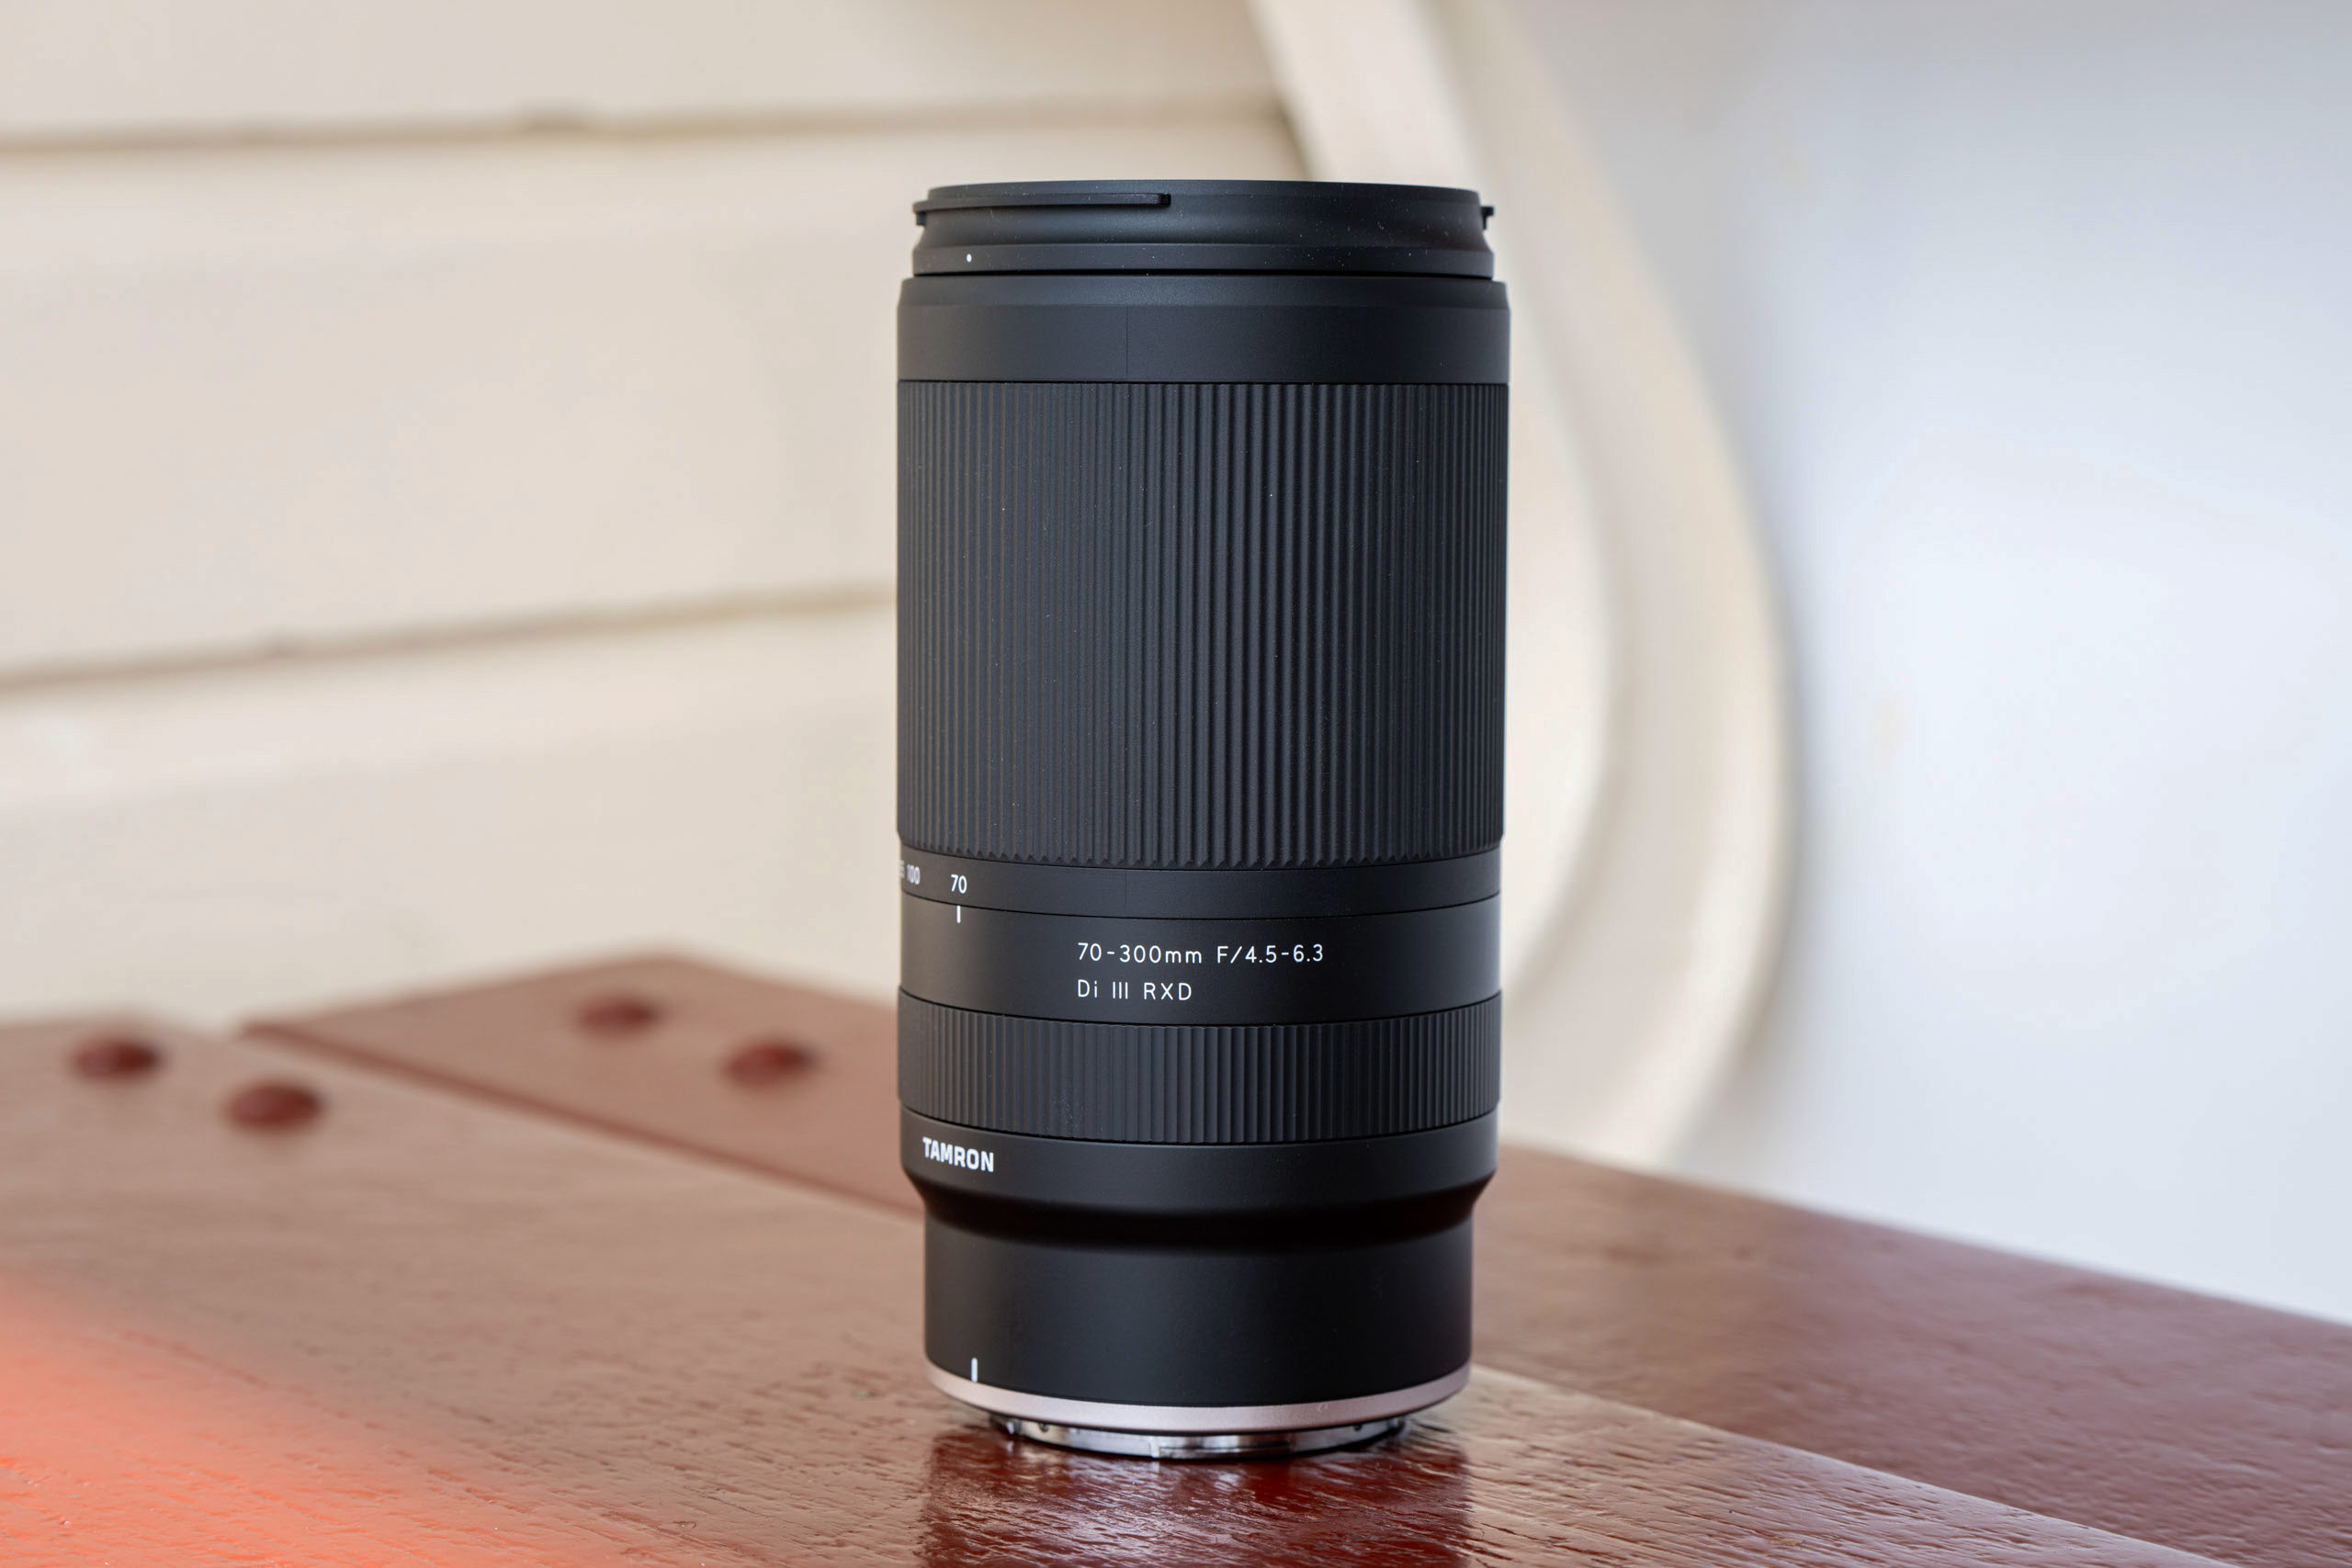 Tamron 70-300mm f/4.5-6.3 Di III RXD for Z mount - Amateur